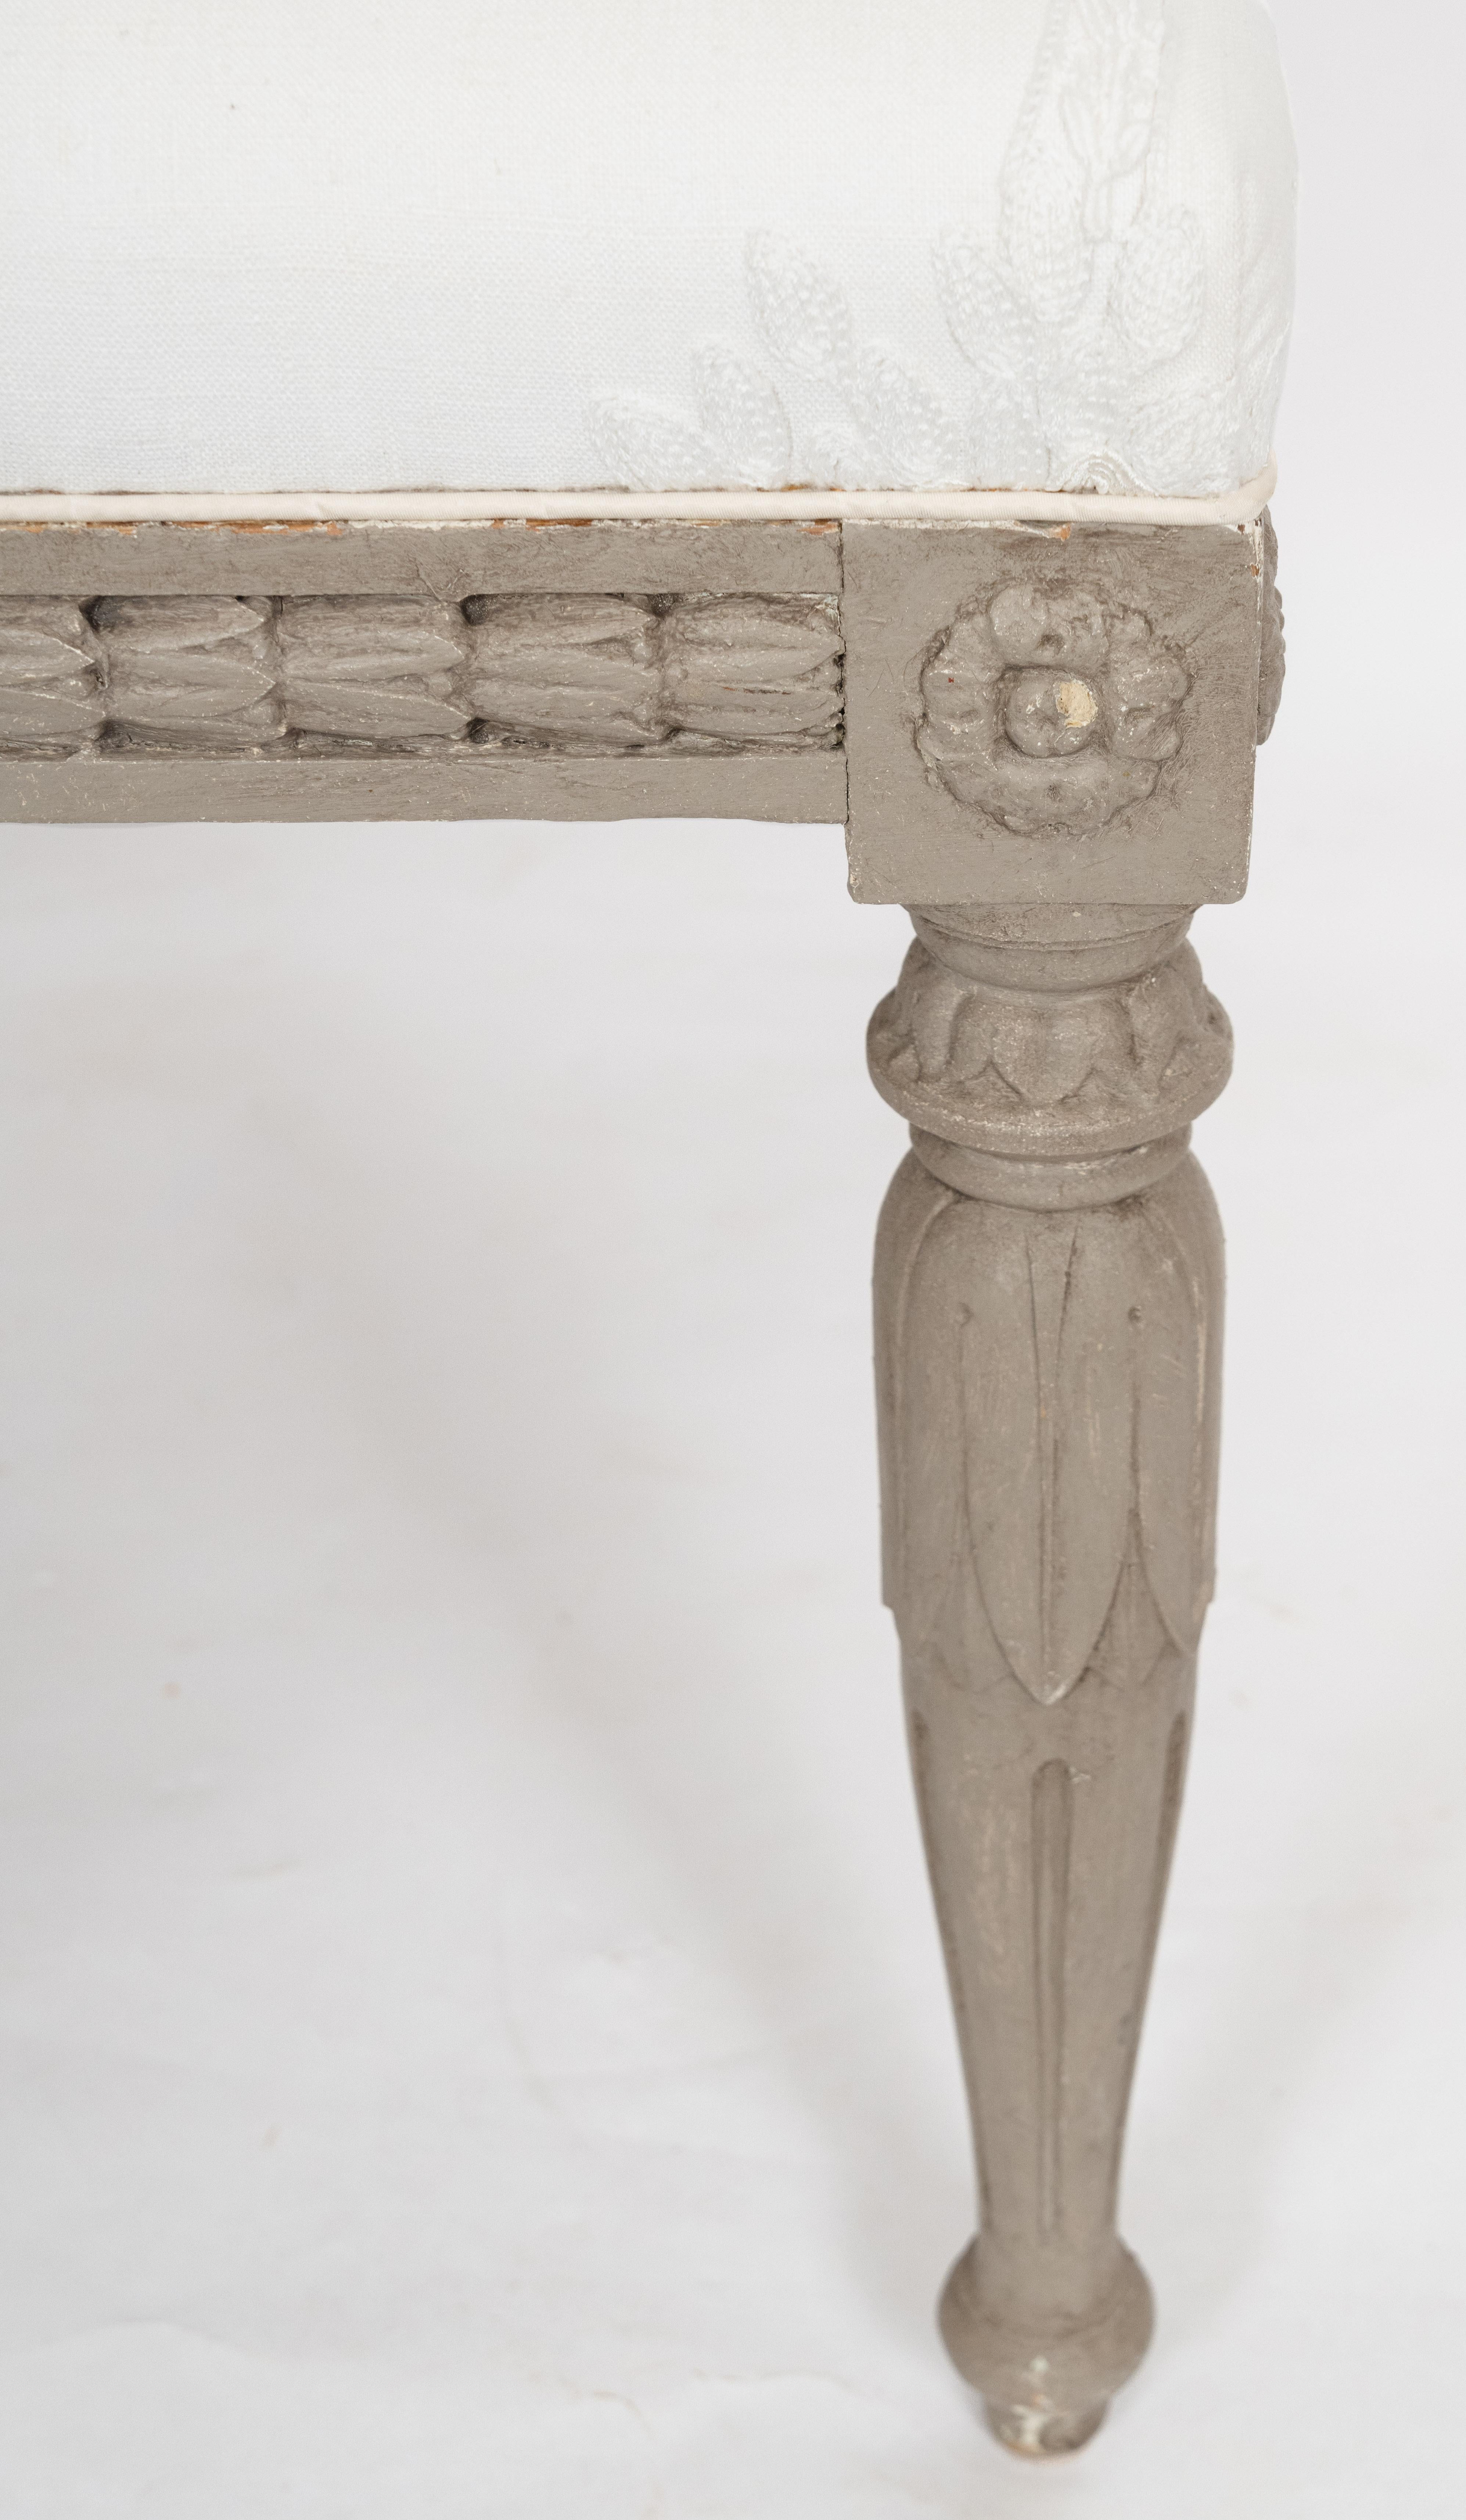 A 19th century Gustavian footstool having ornate carvings along the wooden base. The border having inset bellflower frieze supported by four tapered legs shaped as palmette fluted columns. circa 1850s.